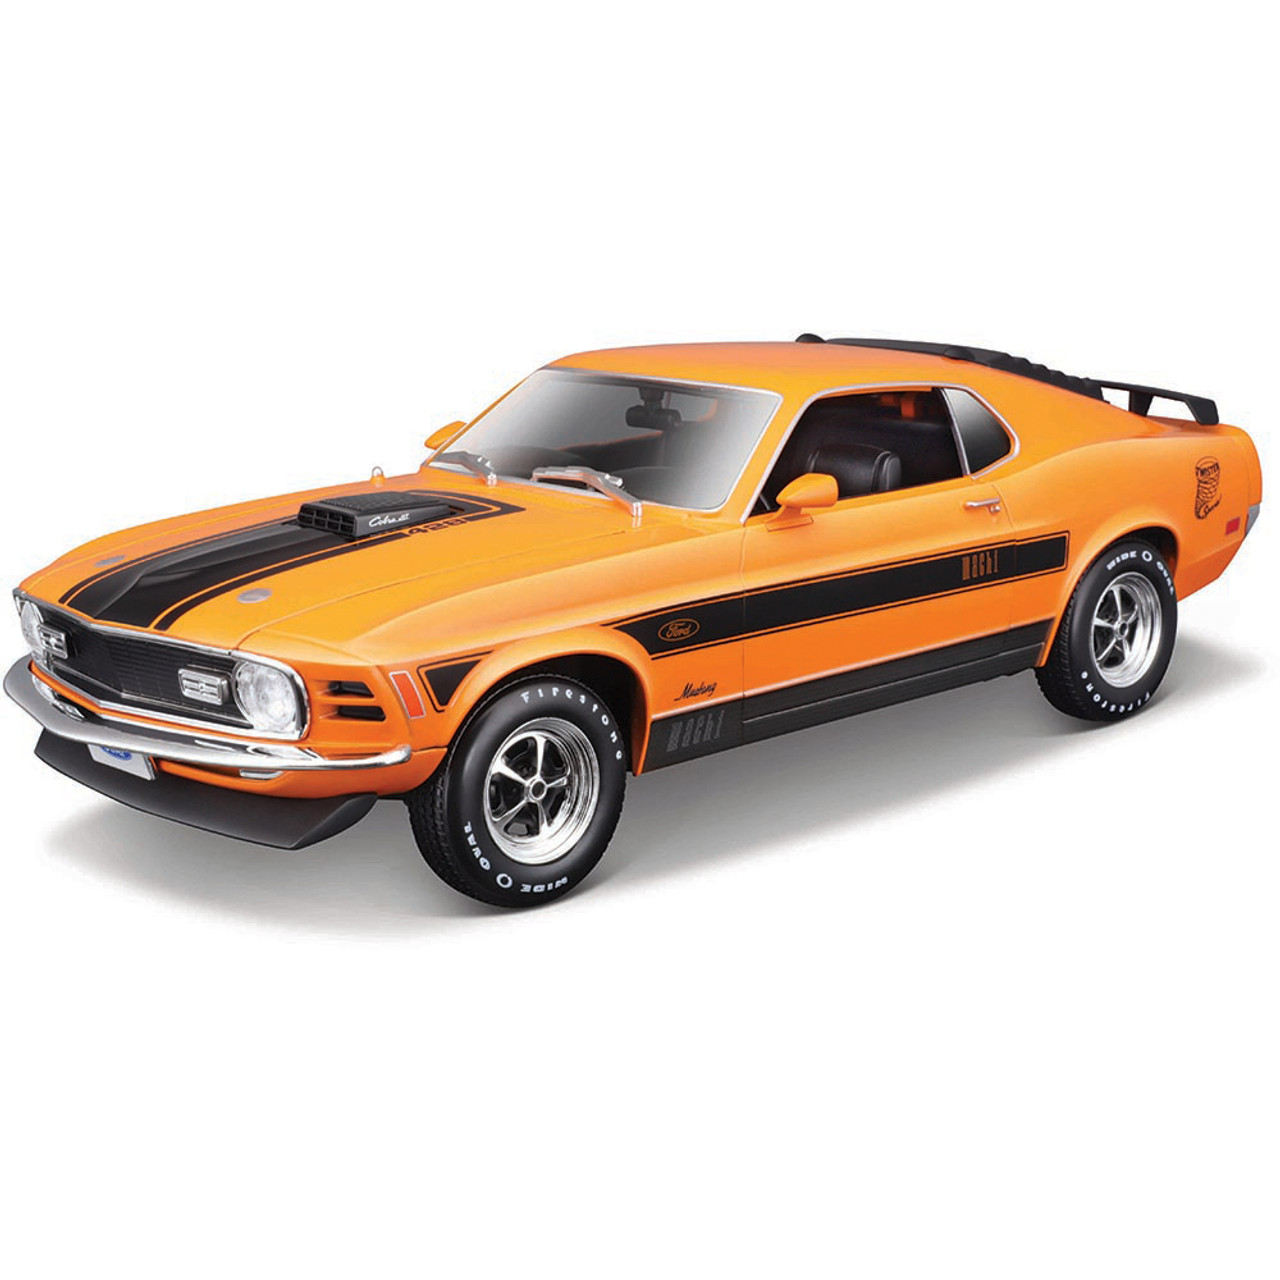 1970 FORD MUSTANG MACH 1 428 BLUE 1/18 SCALE DIECAST CAR MODEL BY MAISTO  31453